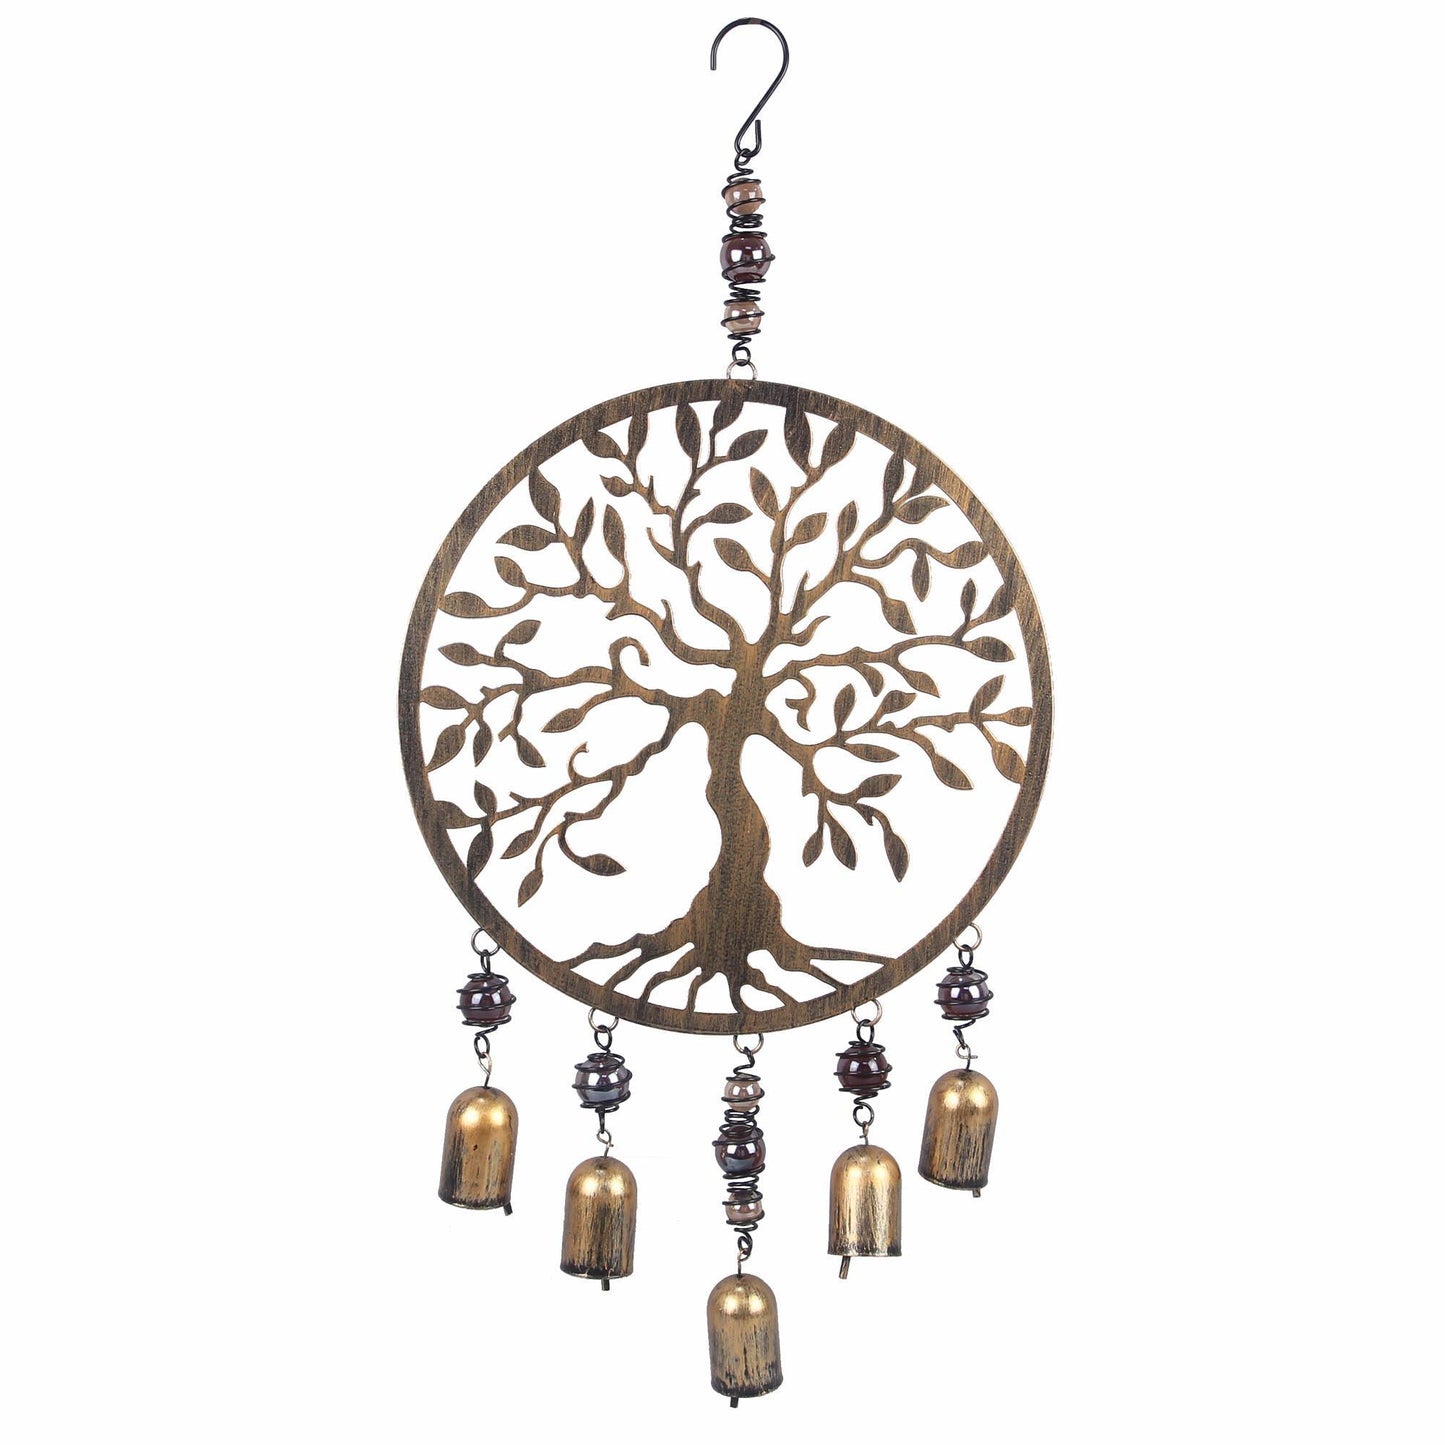 Branching Out—Tree Wind Chime - Wild Wings